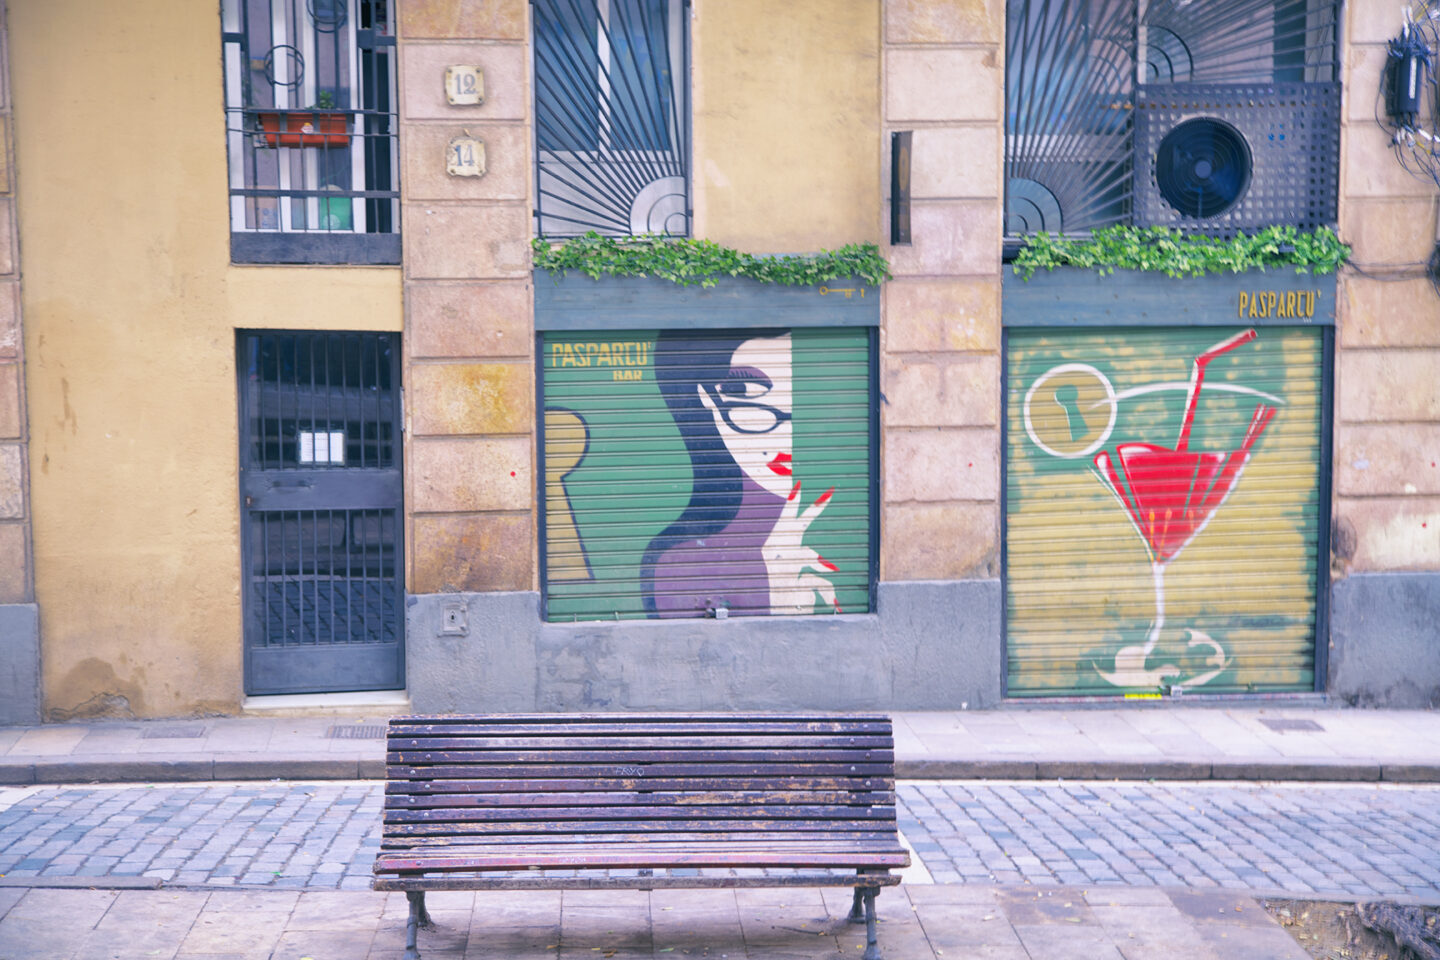 Street art in the Gothic Quarter of beautiful Barcelona, Spain featuring mural of a lady with eyeglasses and a giant martini glass